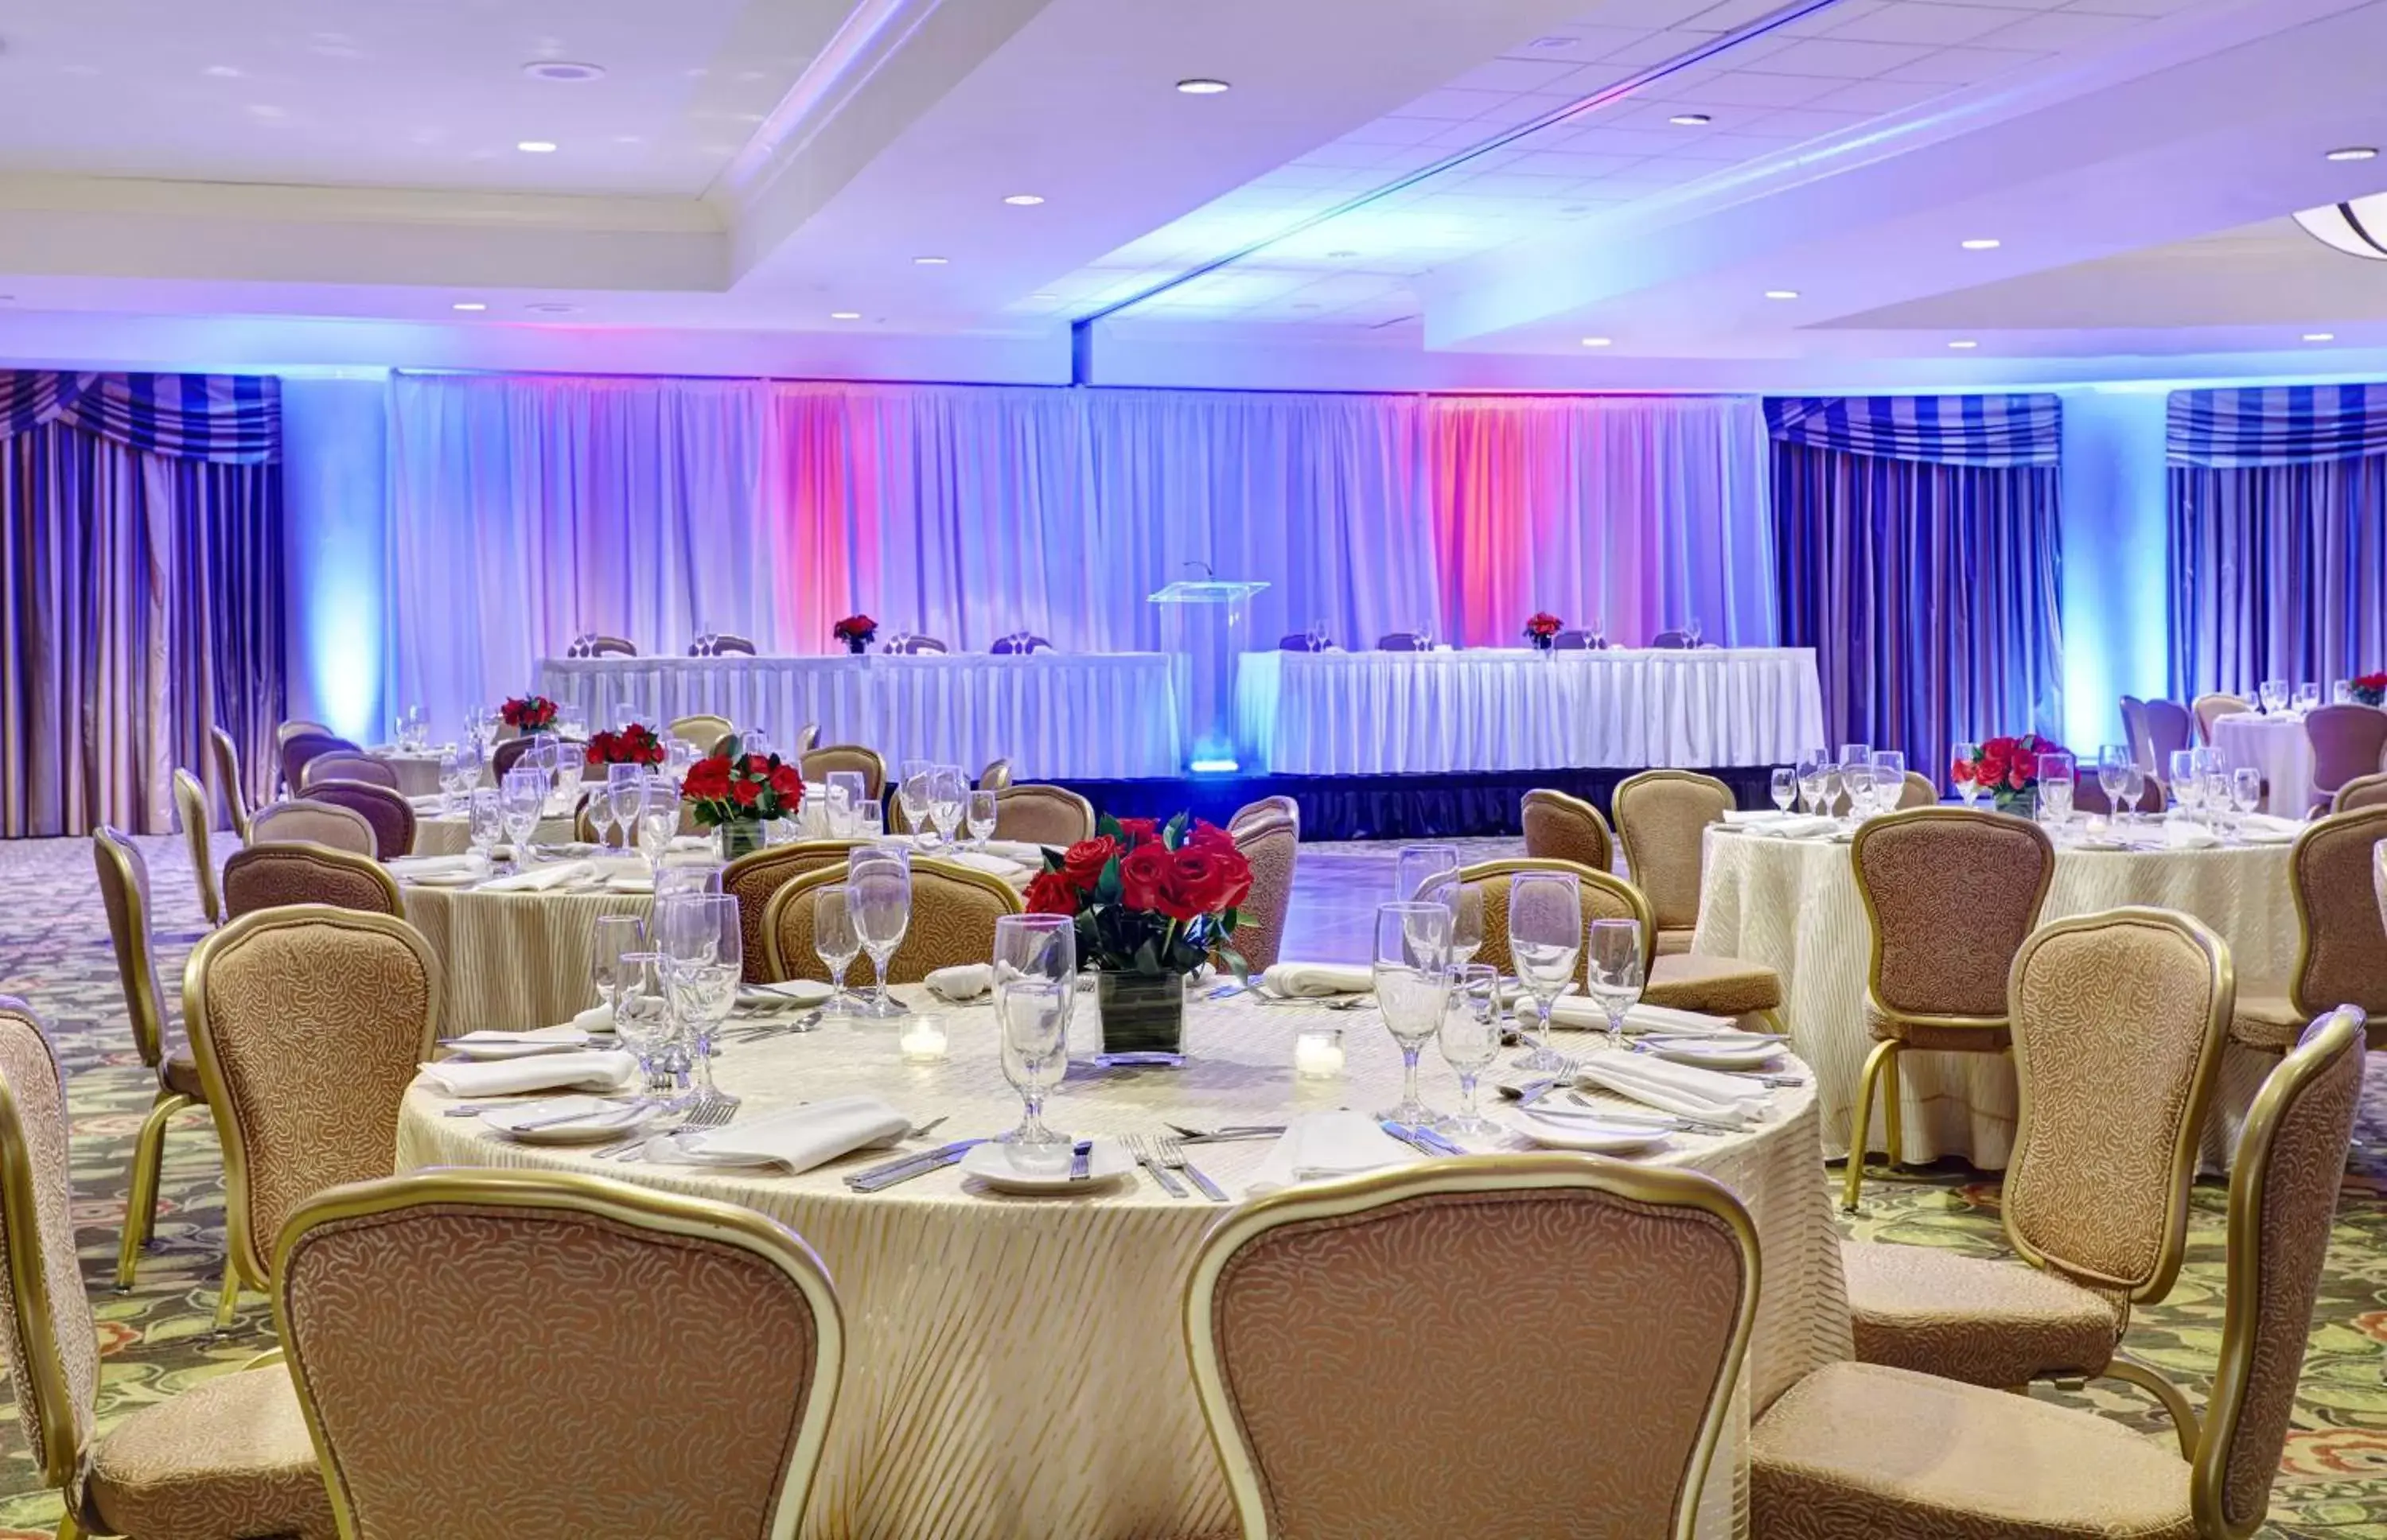 Meeting/conference room, Banquet Facilities in DoubleTree by Hilton Washington DC – Crystal City